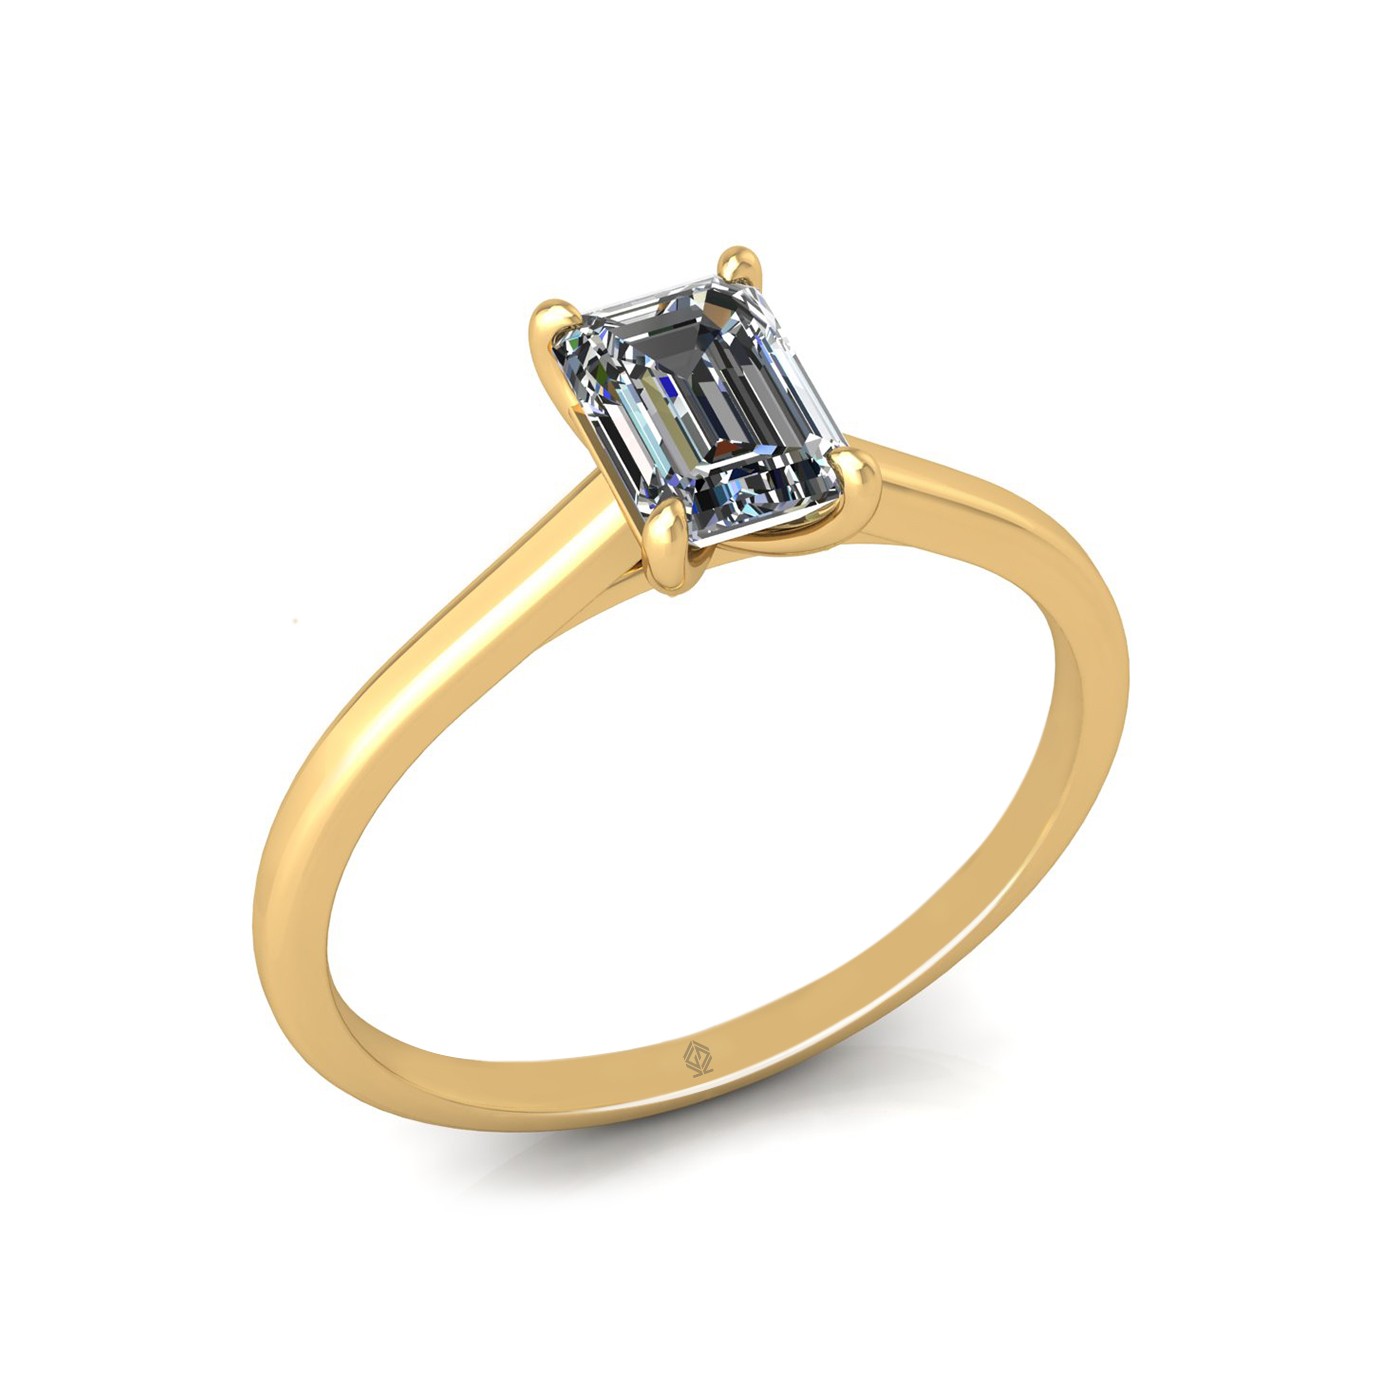 18k yellow gold  0,80 ct 4 prongs solitaire emerald cut diamond engagement ring with whisper thin band